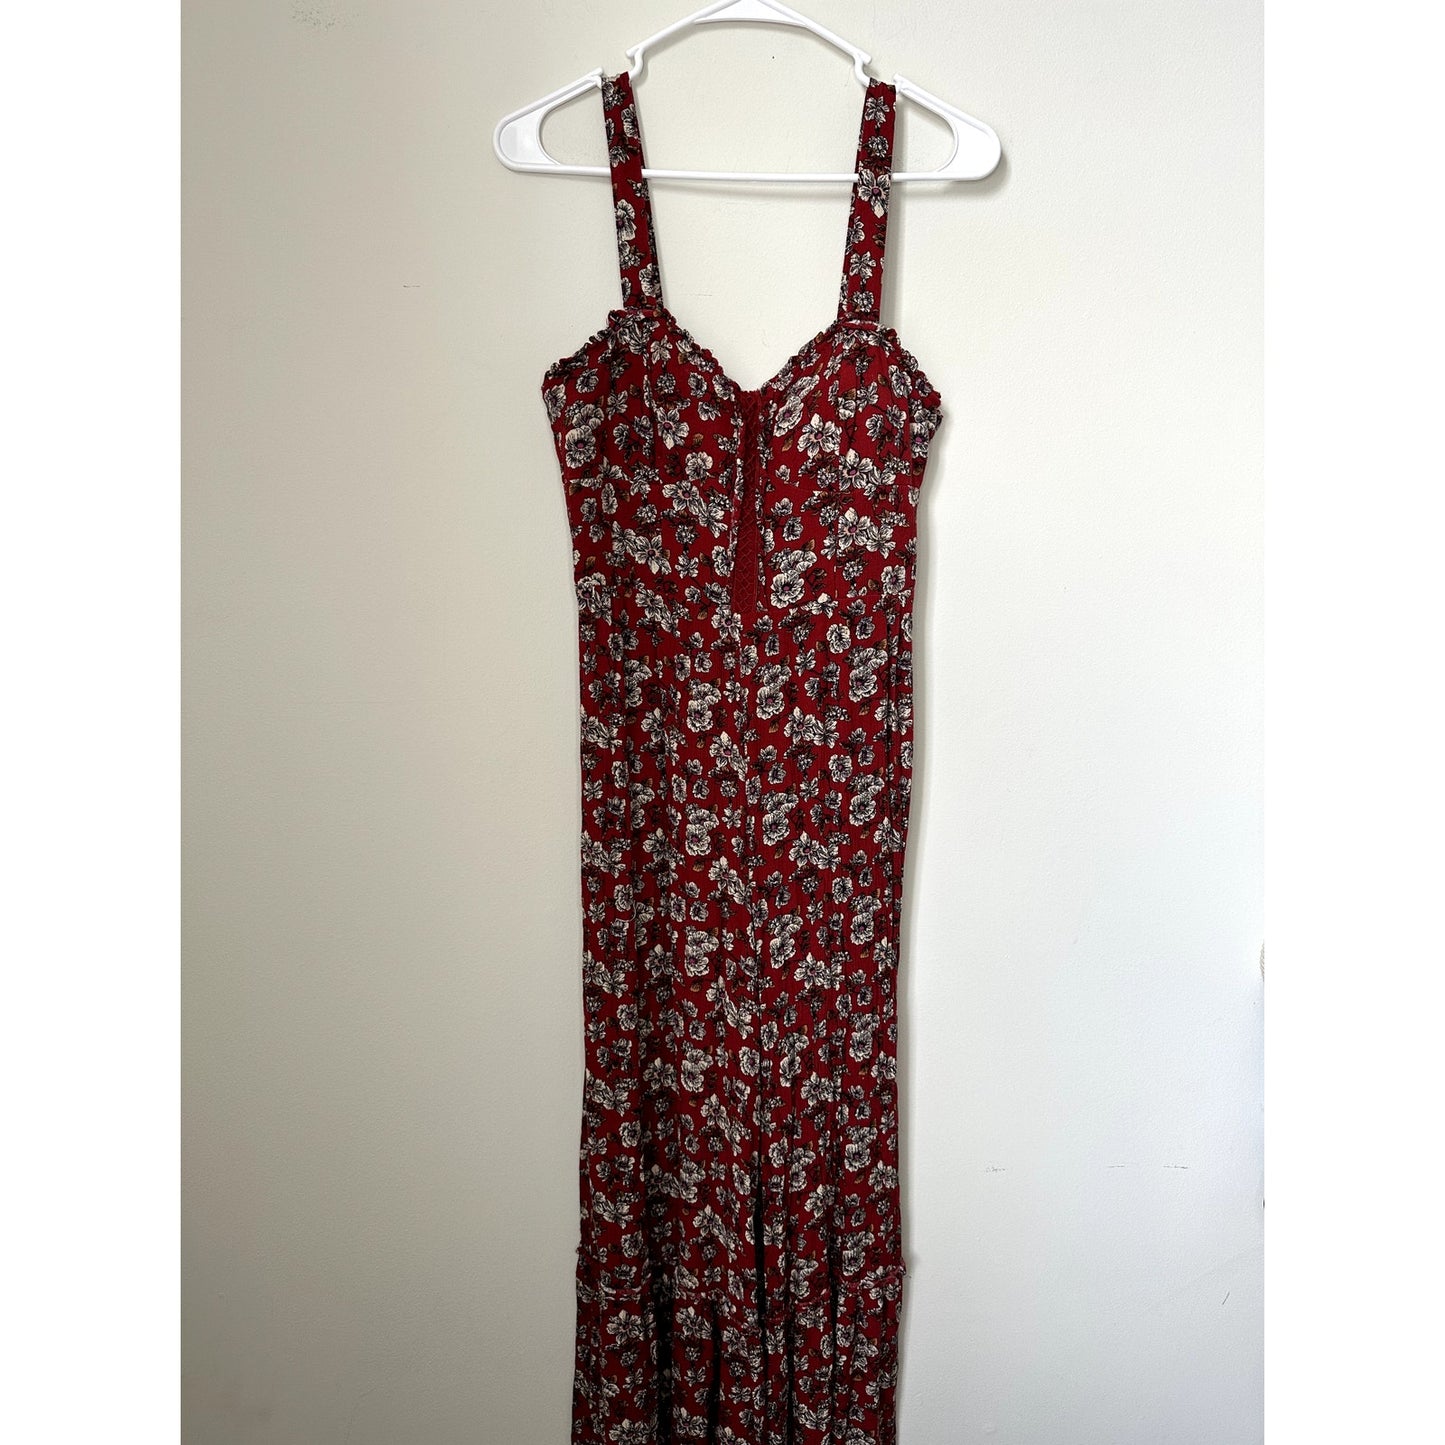 American Eagle Red Floral Jumpsuit, Size 8